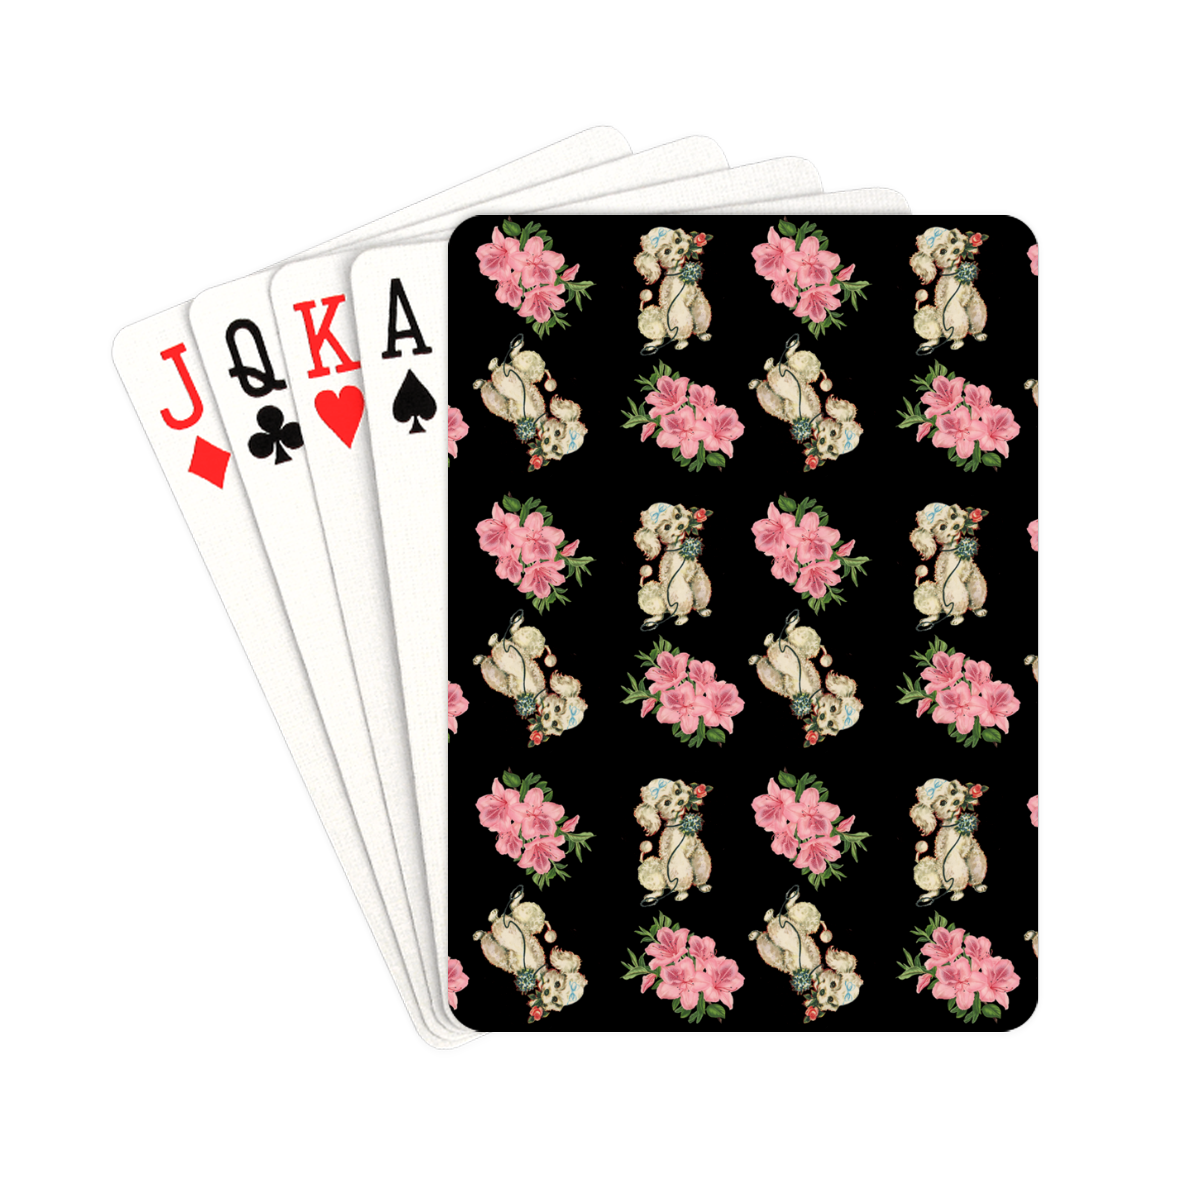 retro dog floral pattern Playing Cards 2.5"x3.5"